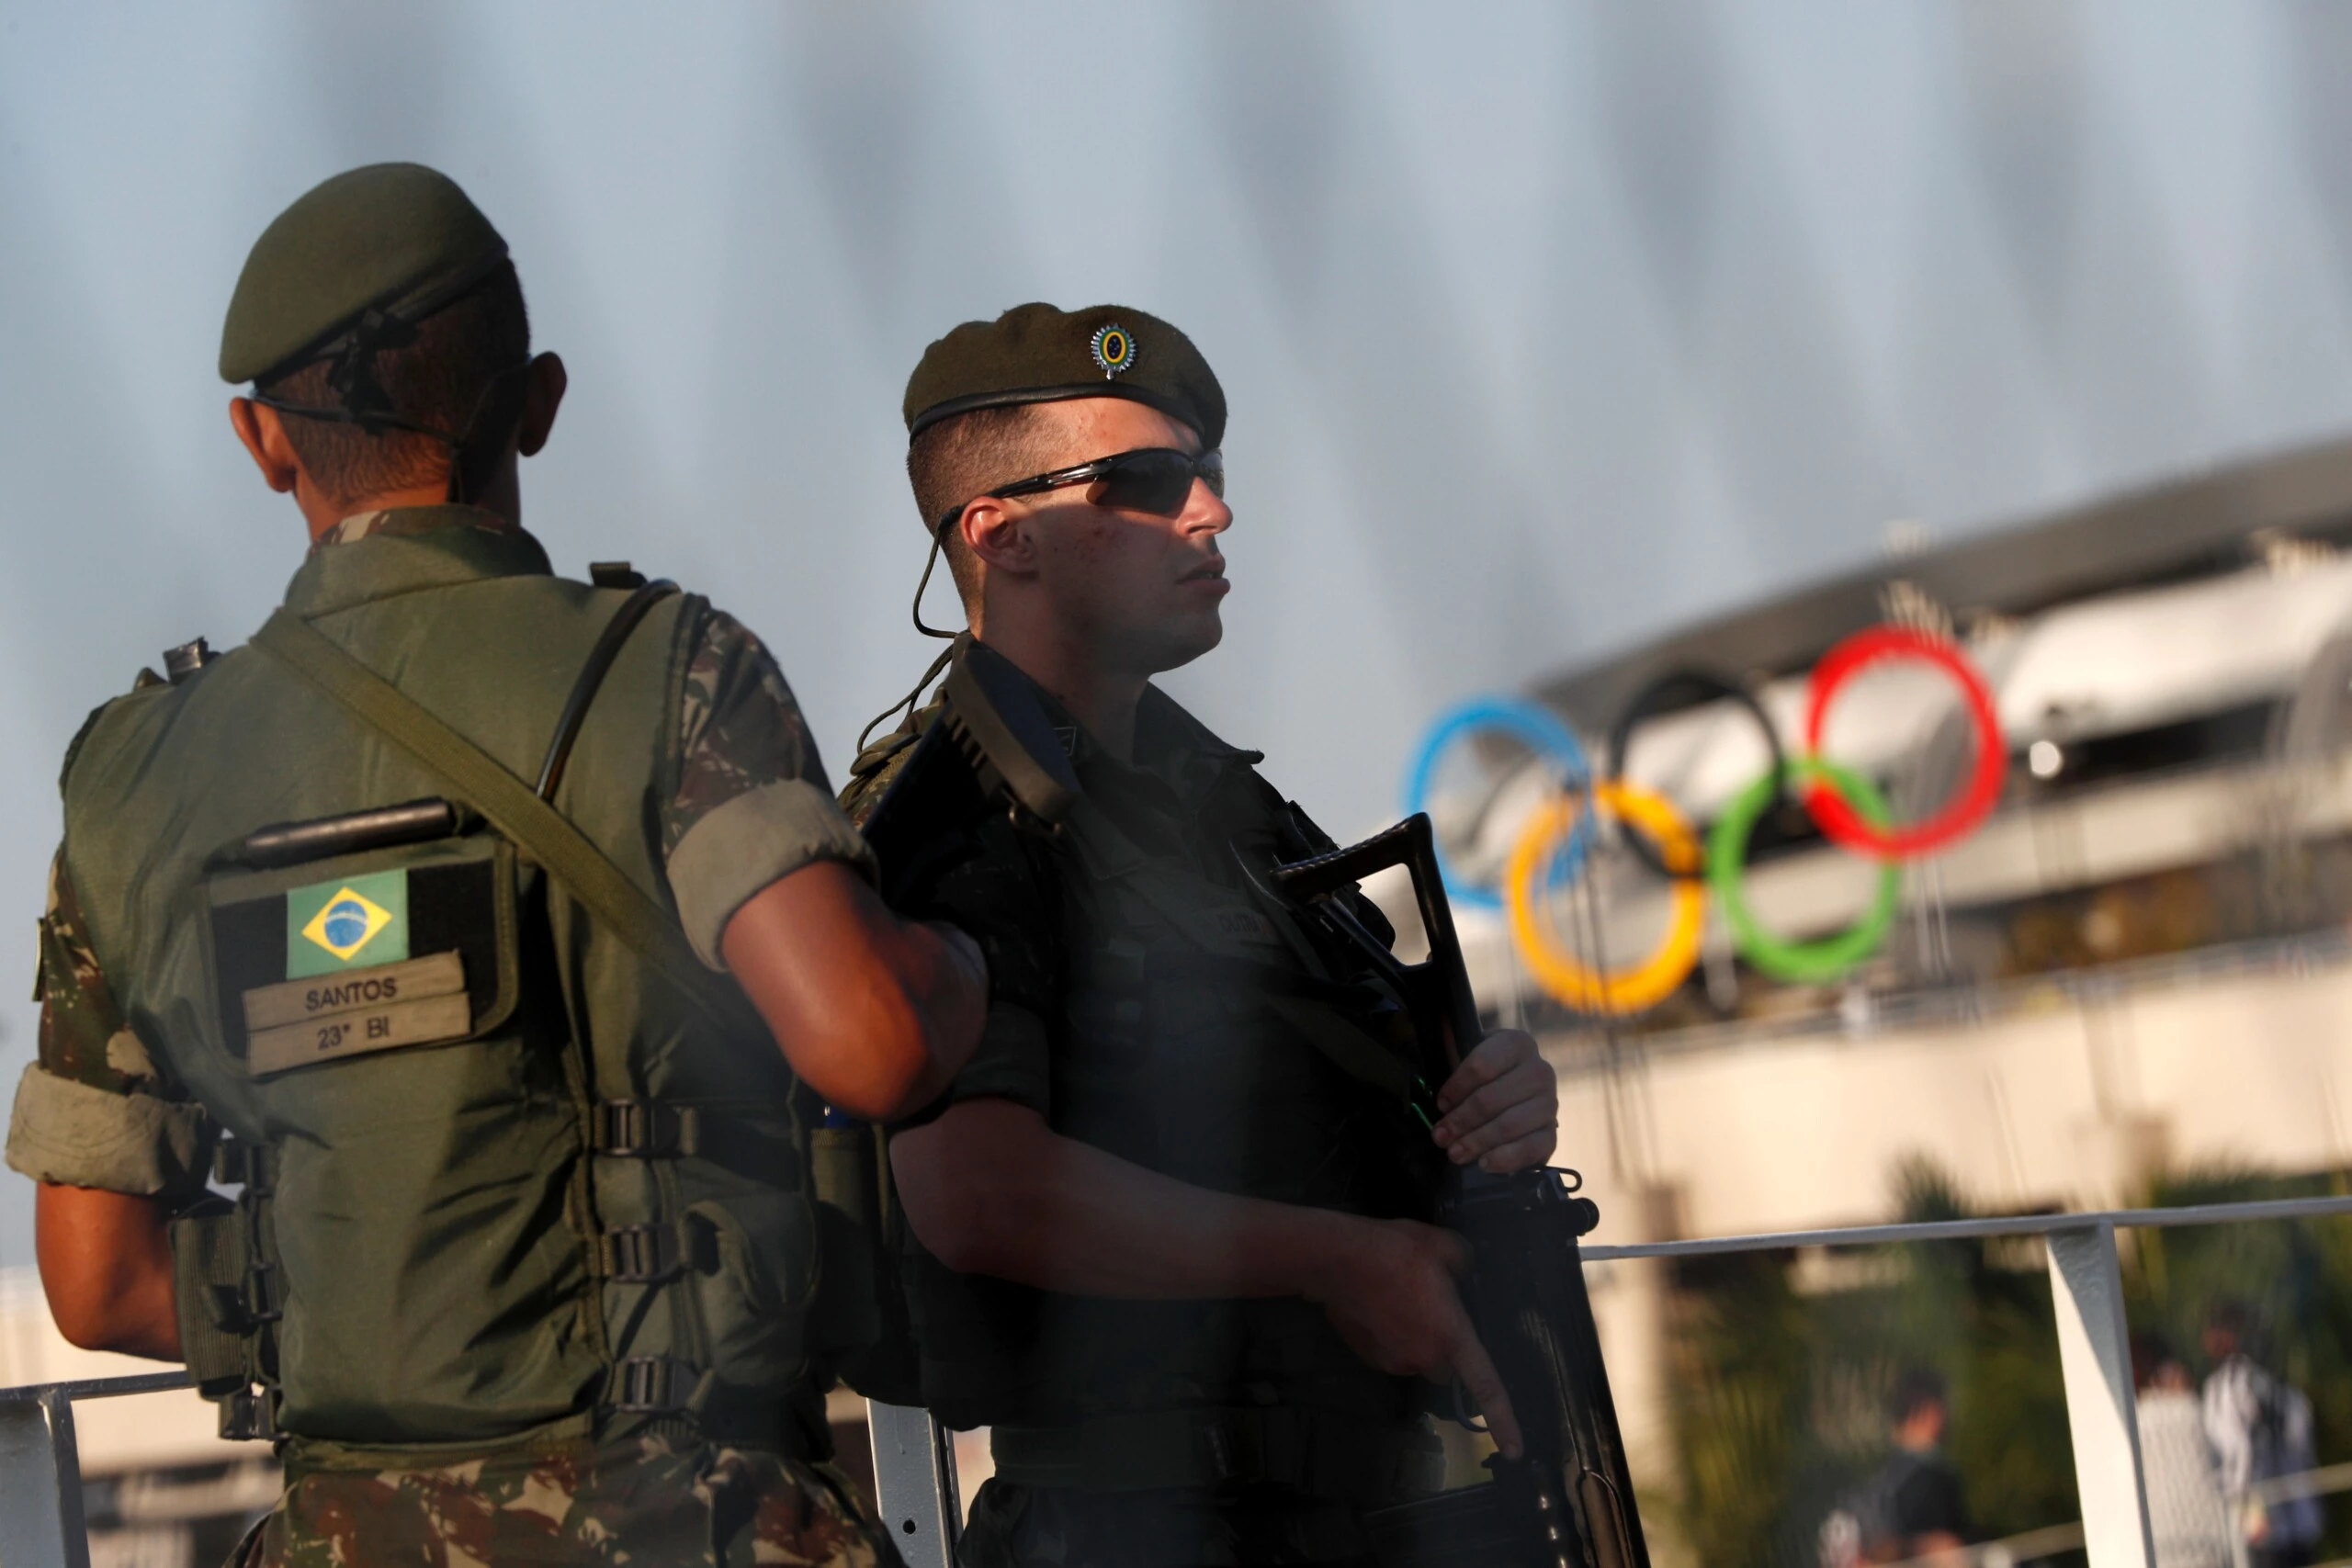 Brazilian security forces stand guard outside the Maracana stadium in Rio de Janeiro on August 5, 2016, ahead of the opening ceremony of the Rio 2016 Olympic Games. A vast security blanket of 85,000 military personnel and police -- twice the number on duty at the 2012 London Games -- are draped over the city to ward off the threat of street crime and terror attacks. / AFP / Adrian DENNIS        (Photo credit should read ADRIAN DENNIS/AFP/Getty Images)